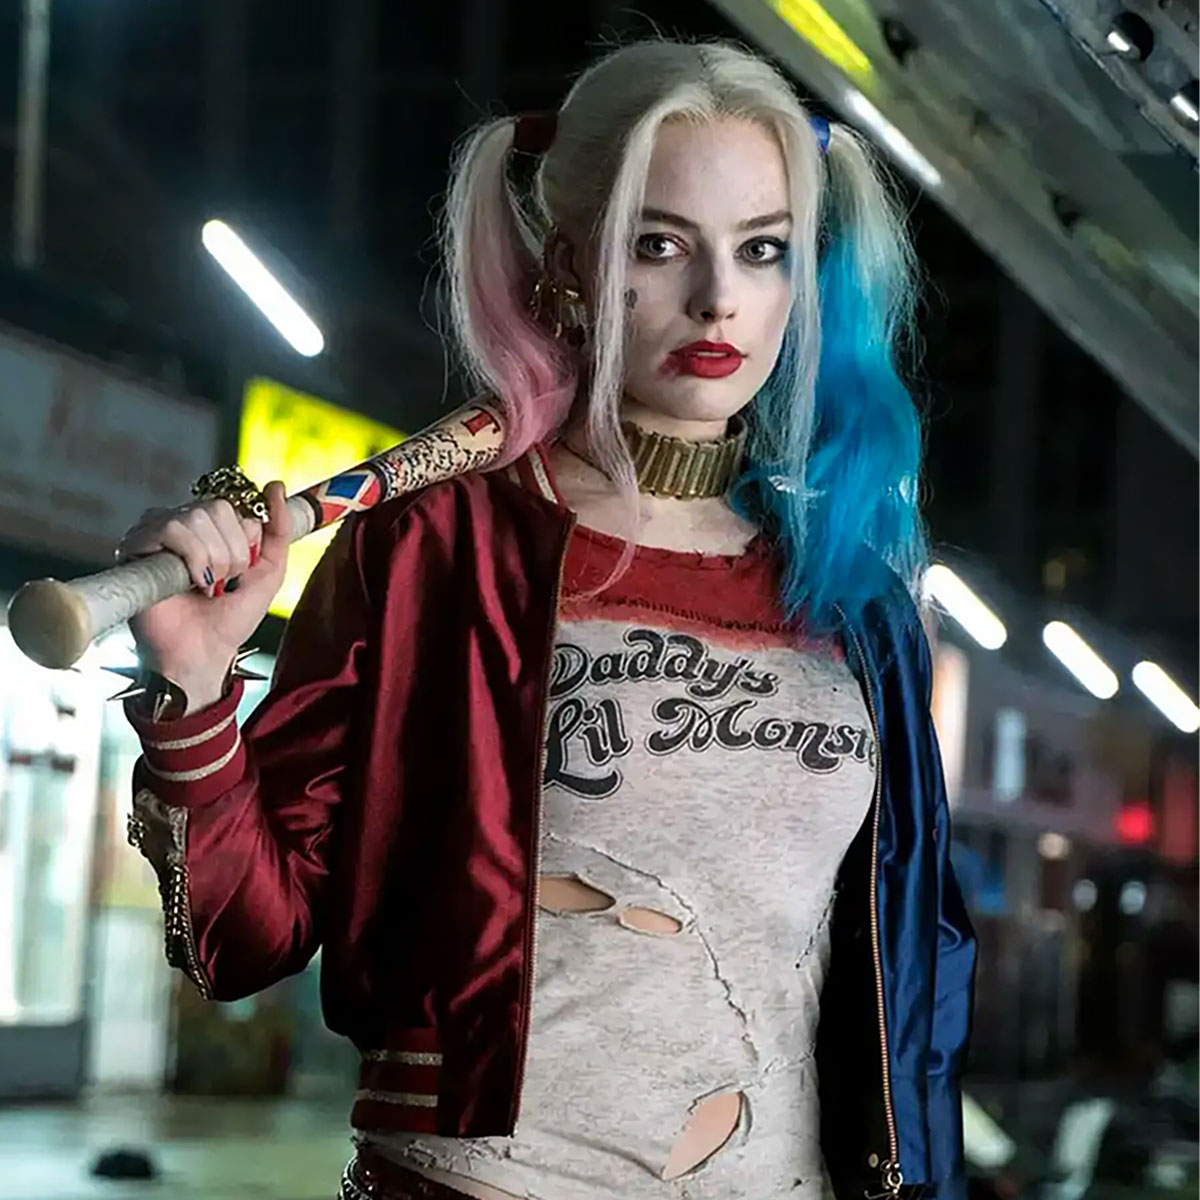 Here's Everything You Need For A Harley Quinn Halloween Costume - SHEfinds